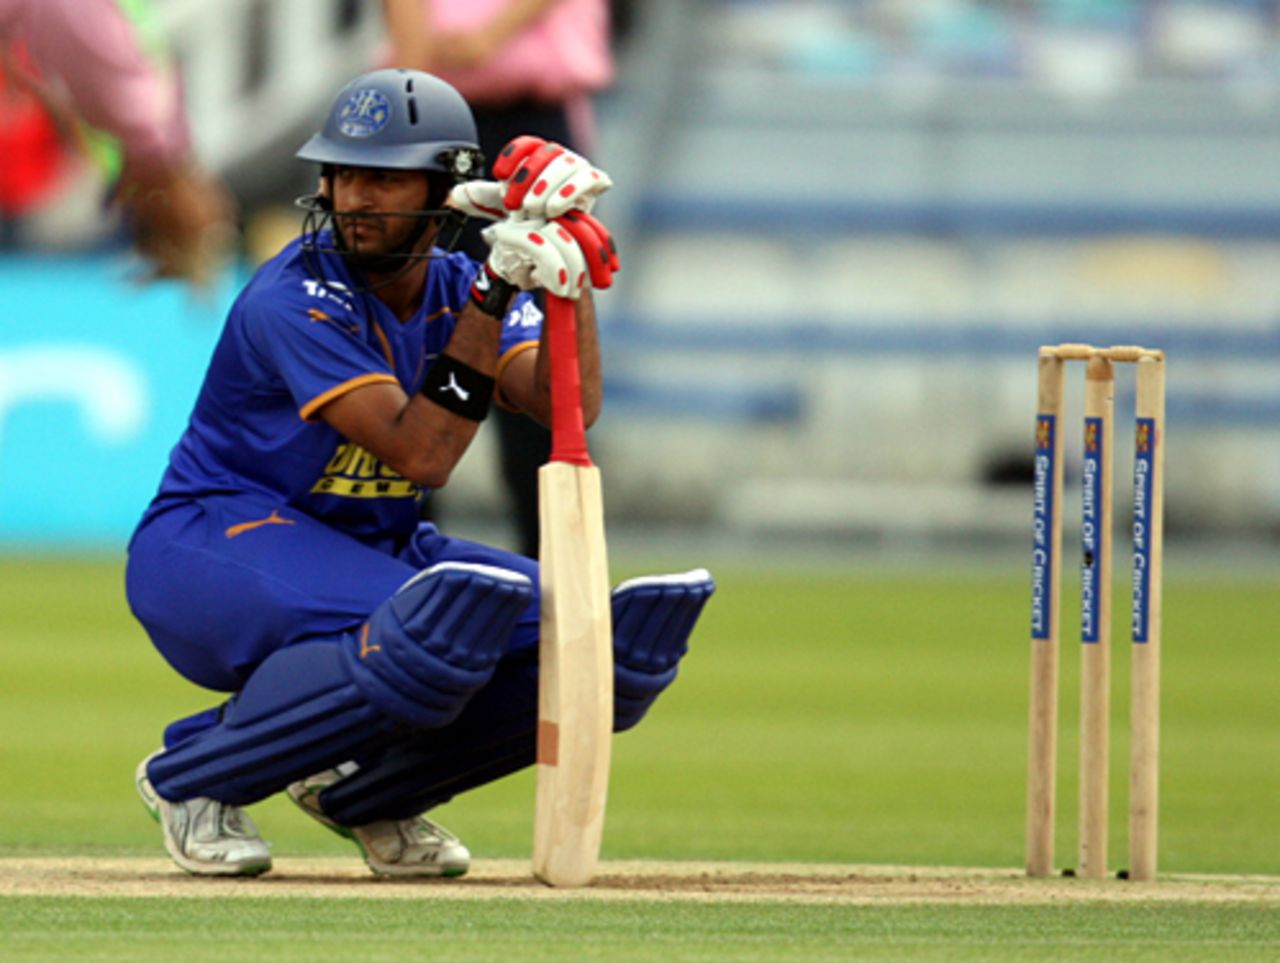 Faiz Fazal gears up to face the first ball, Middlesex v Rajasthan Royals, British Asian Cup, Lord's, July 6, 2009